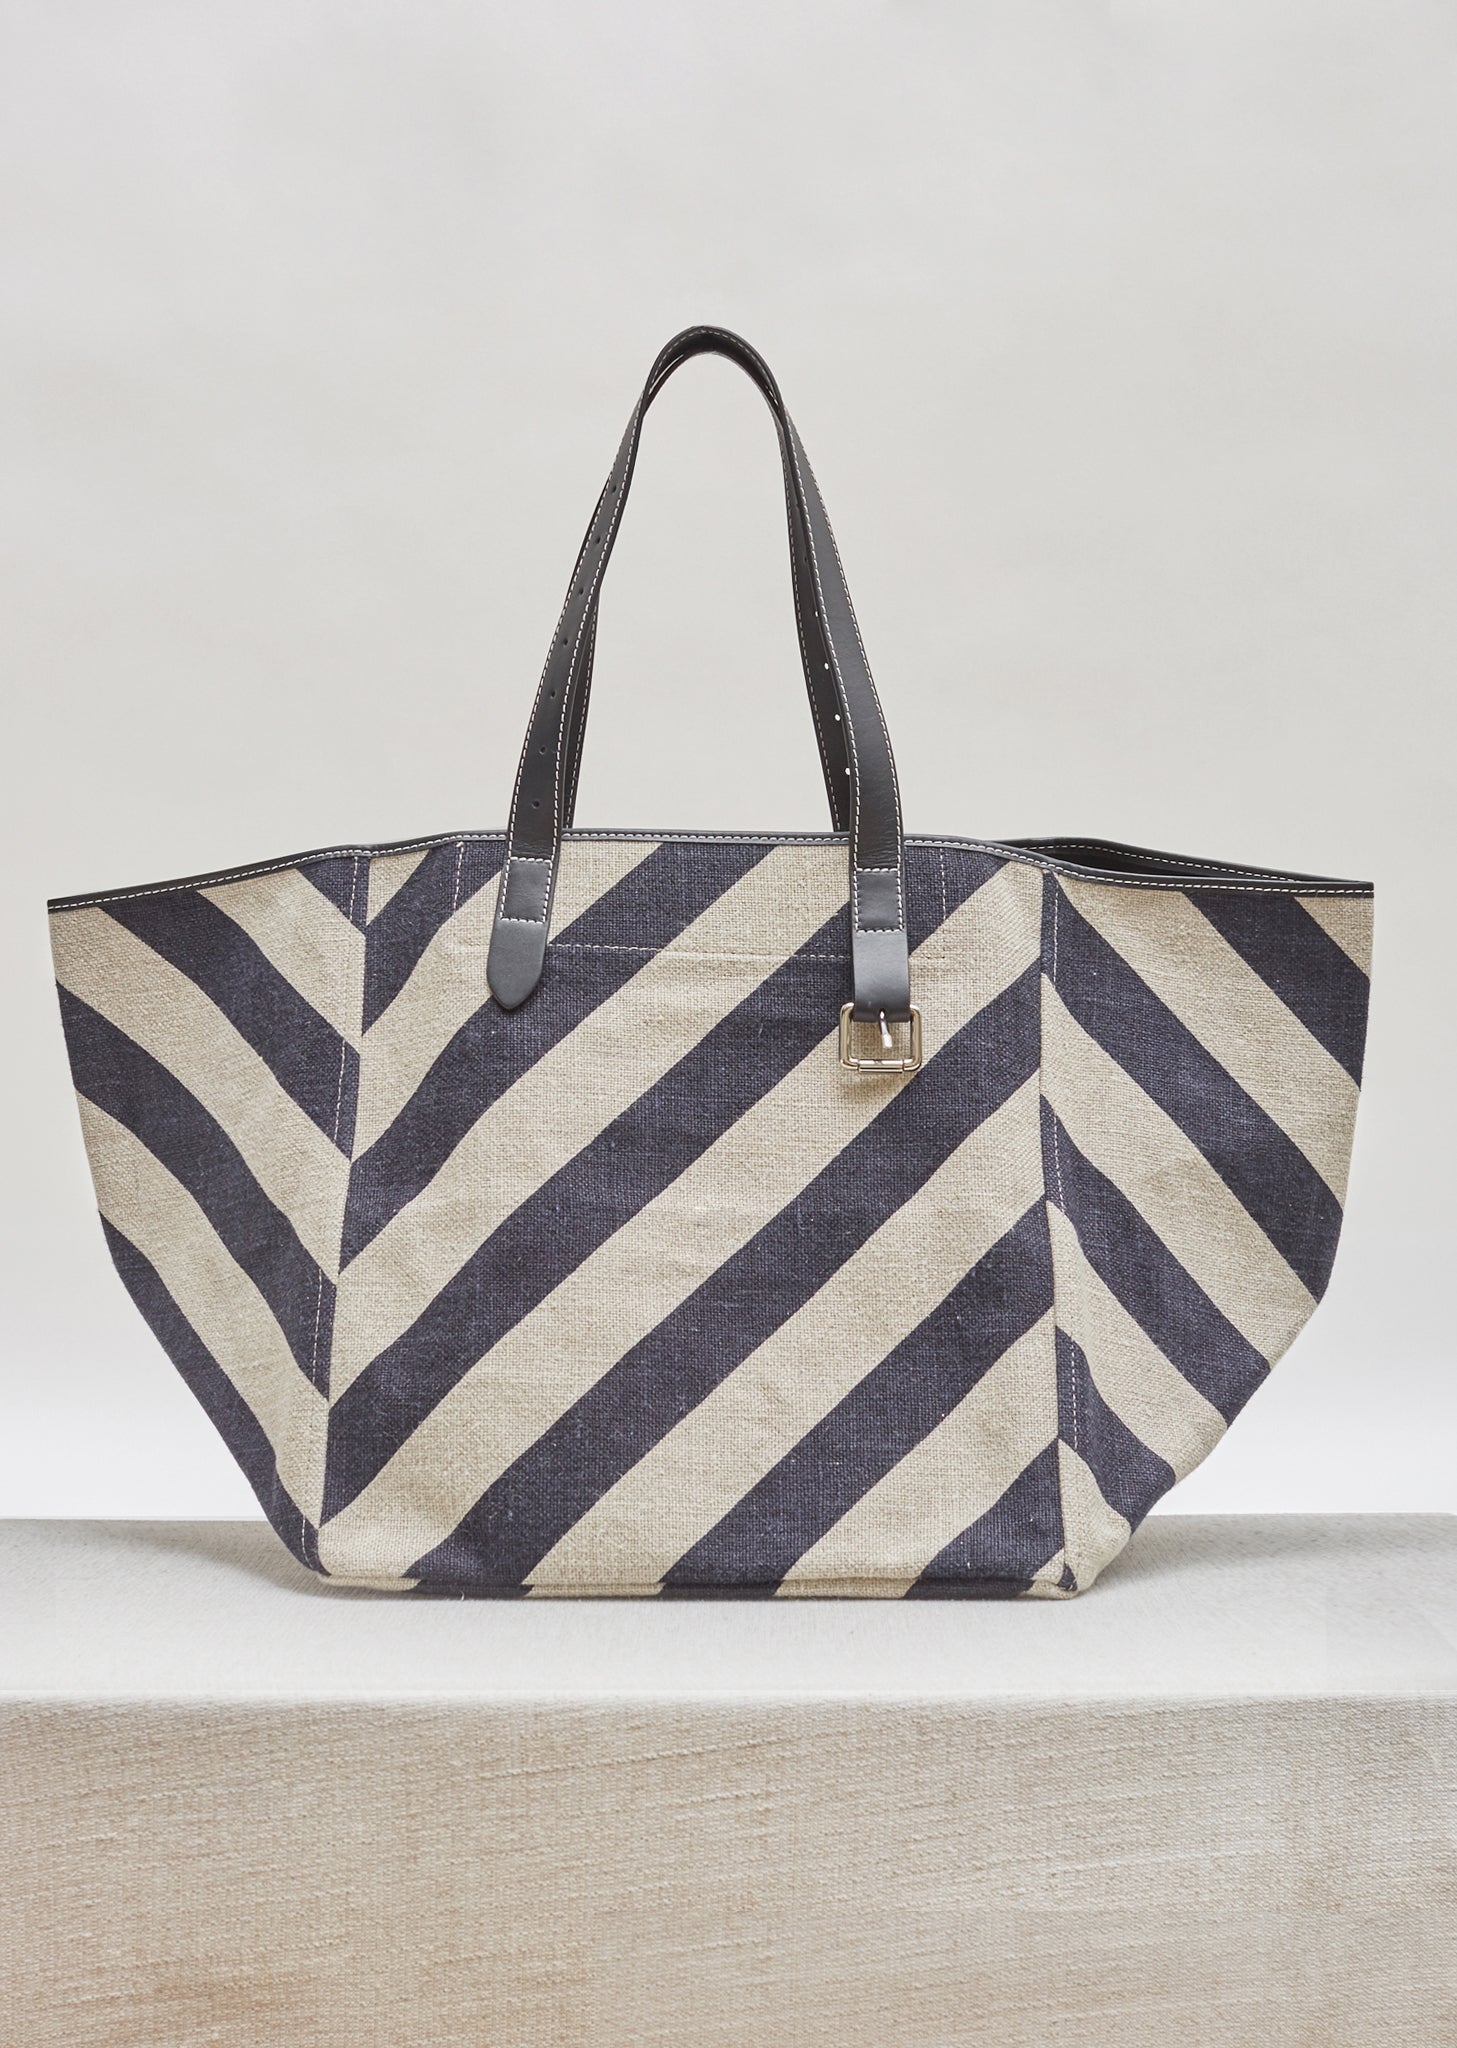 JW Anderson Print Canvas Tote Bag in White